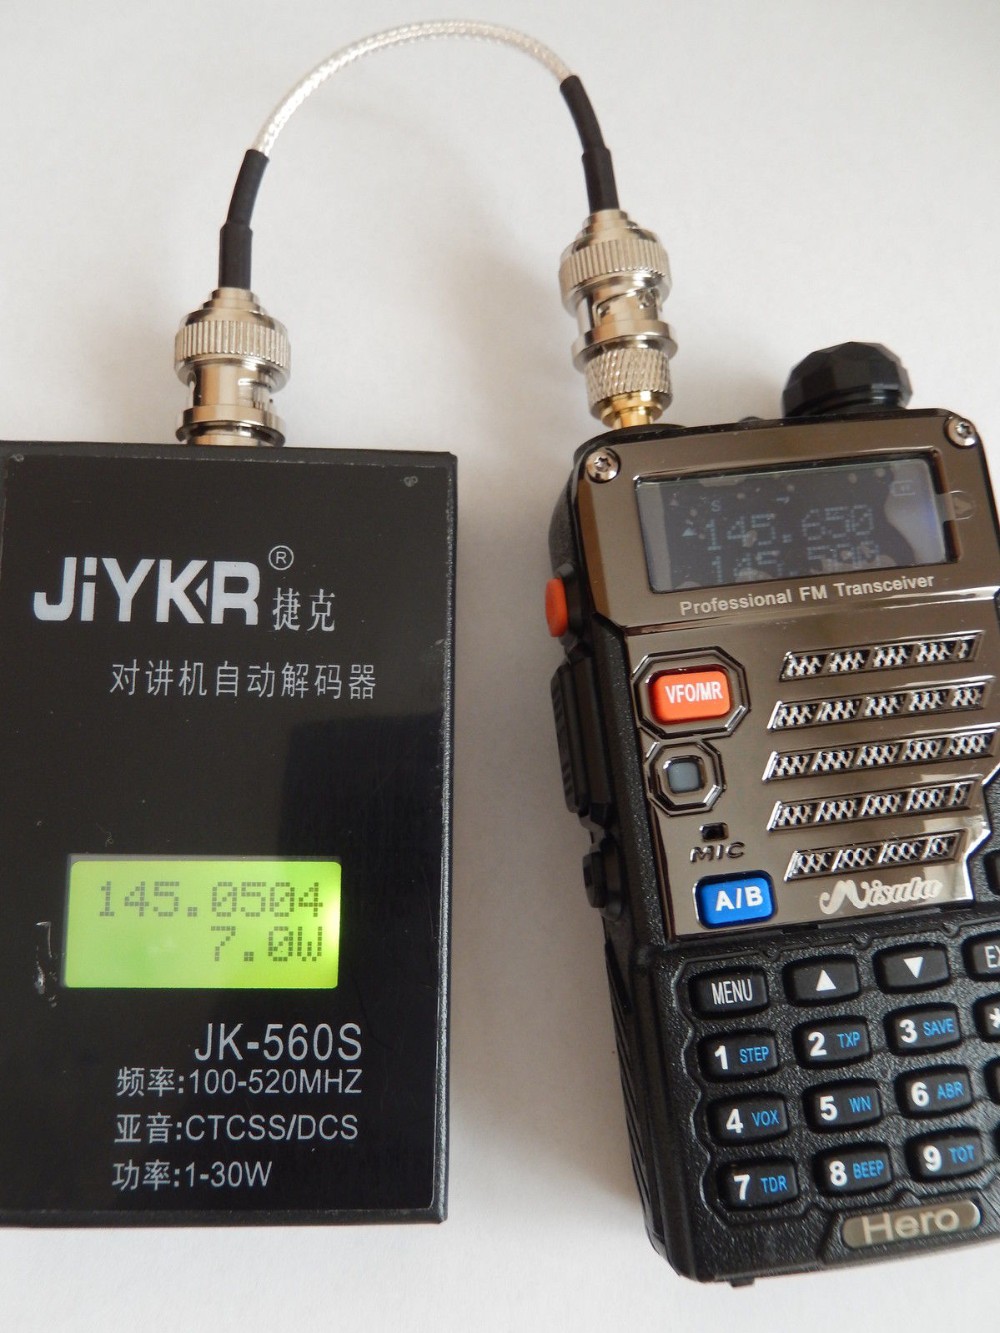 JIYKR-JK-560S-Walkie-Talkie-Frequency-Counter-100MHz-520MHz-CTCSS-DCS-decoder-for-2-way-Radio (1)